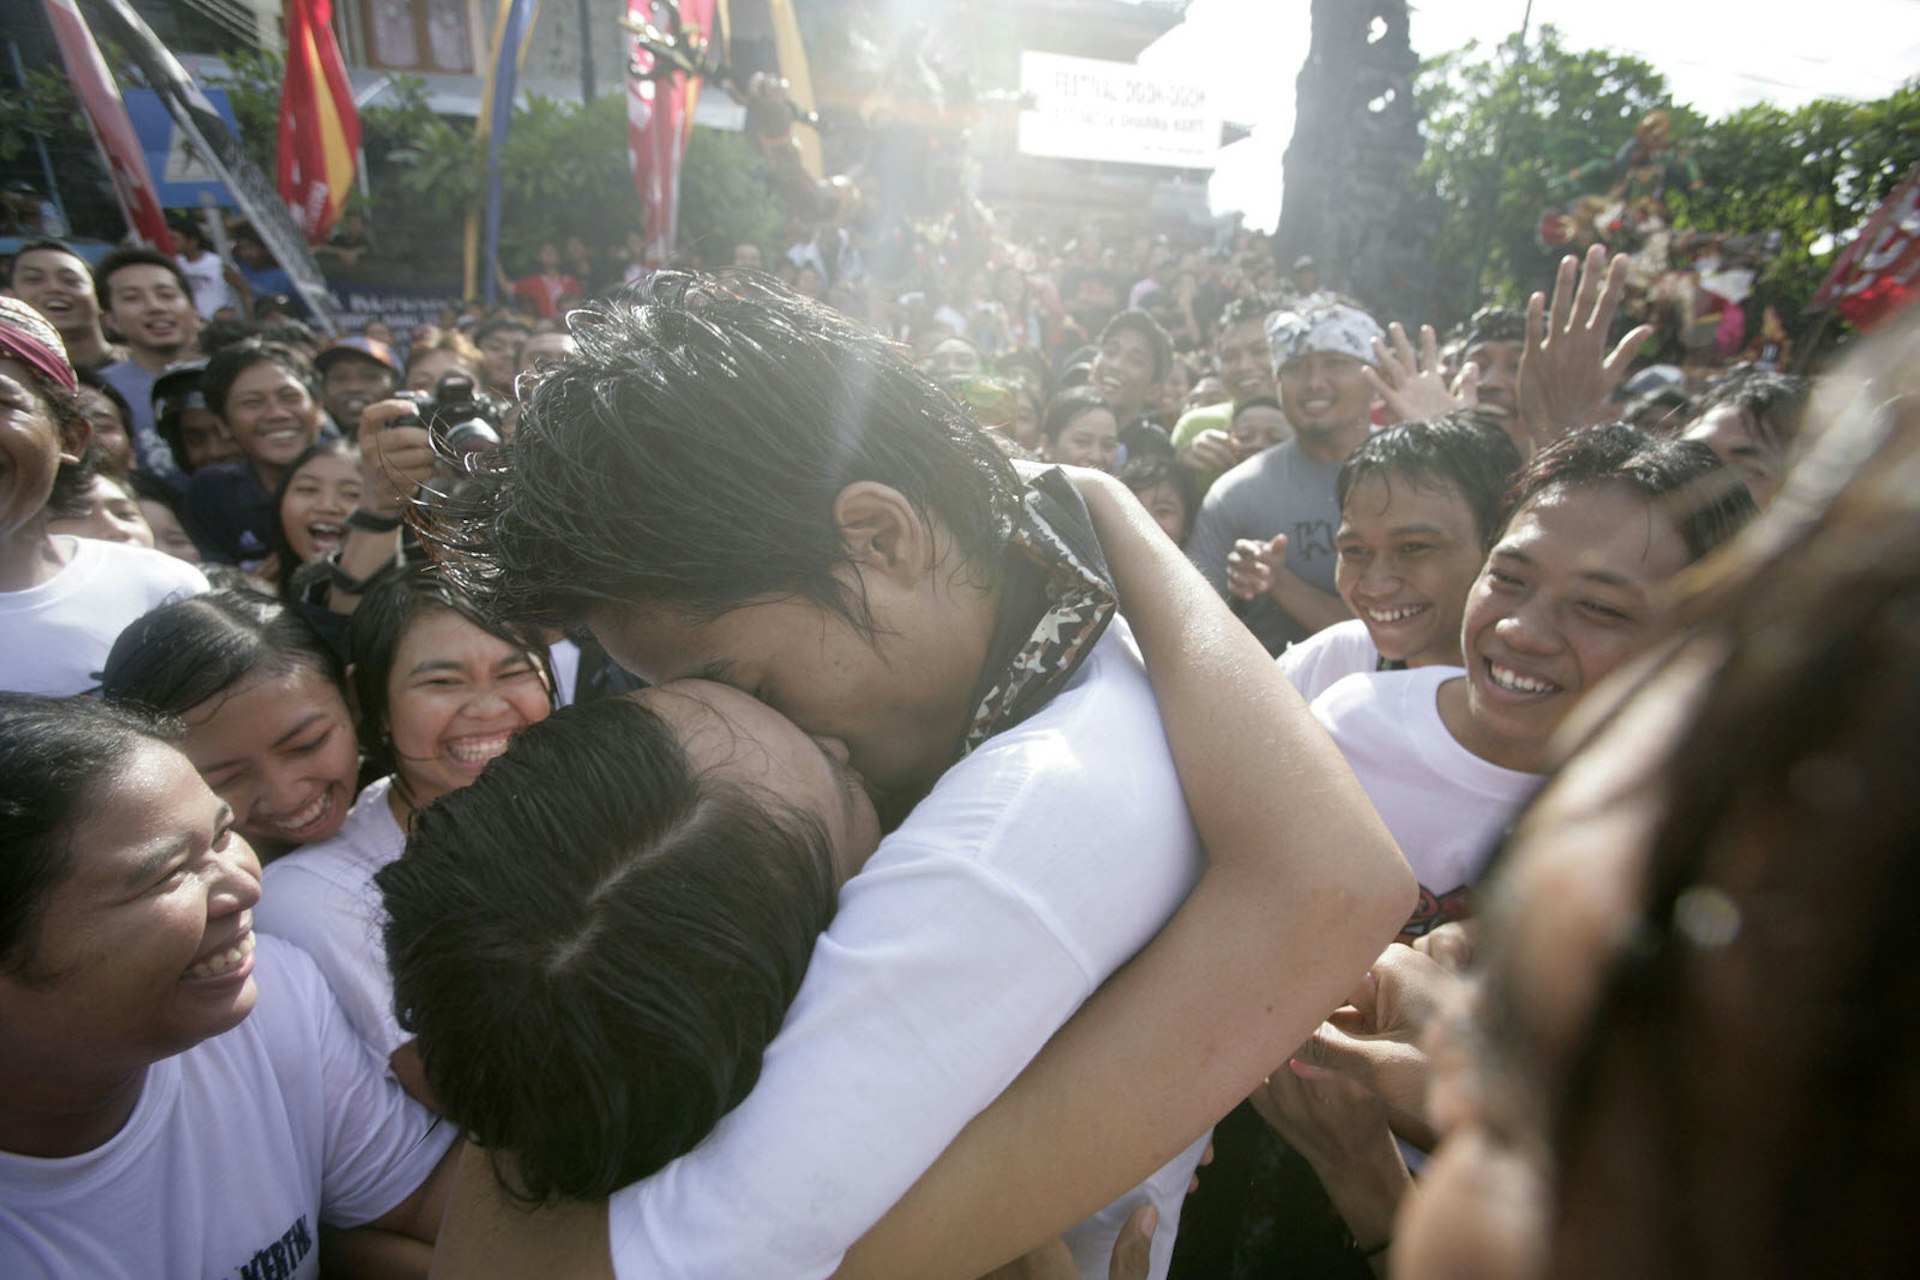 A young Balinese couple kiss during the Kissing Festival held in Sesetan village, Bali, Indonesia